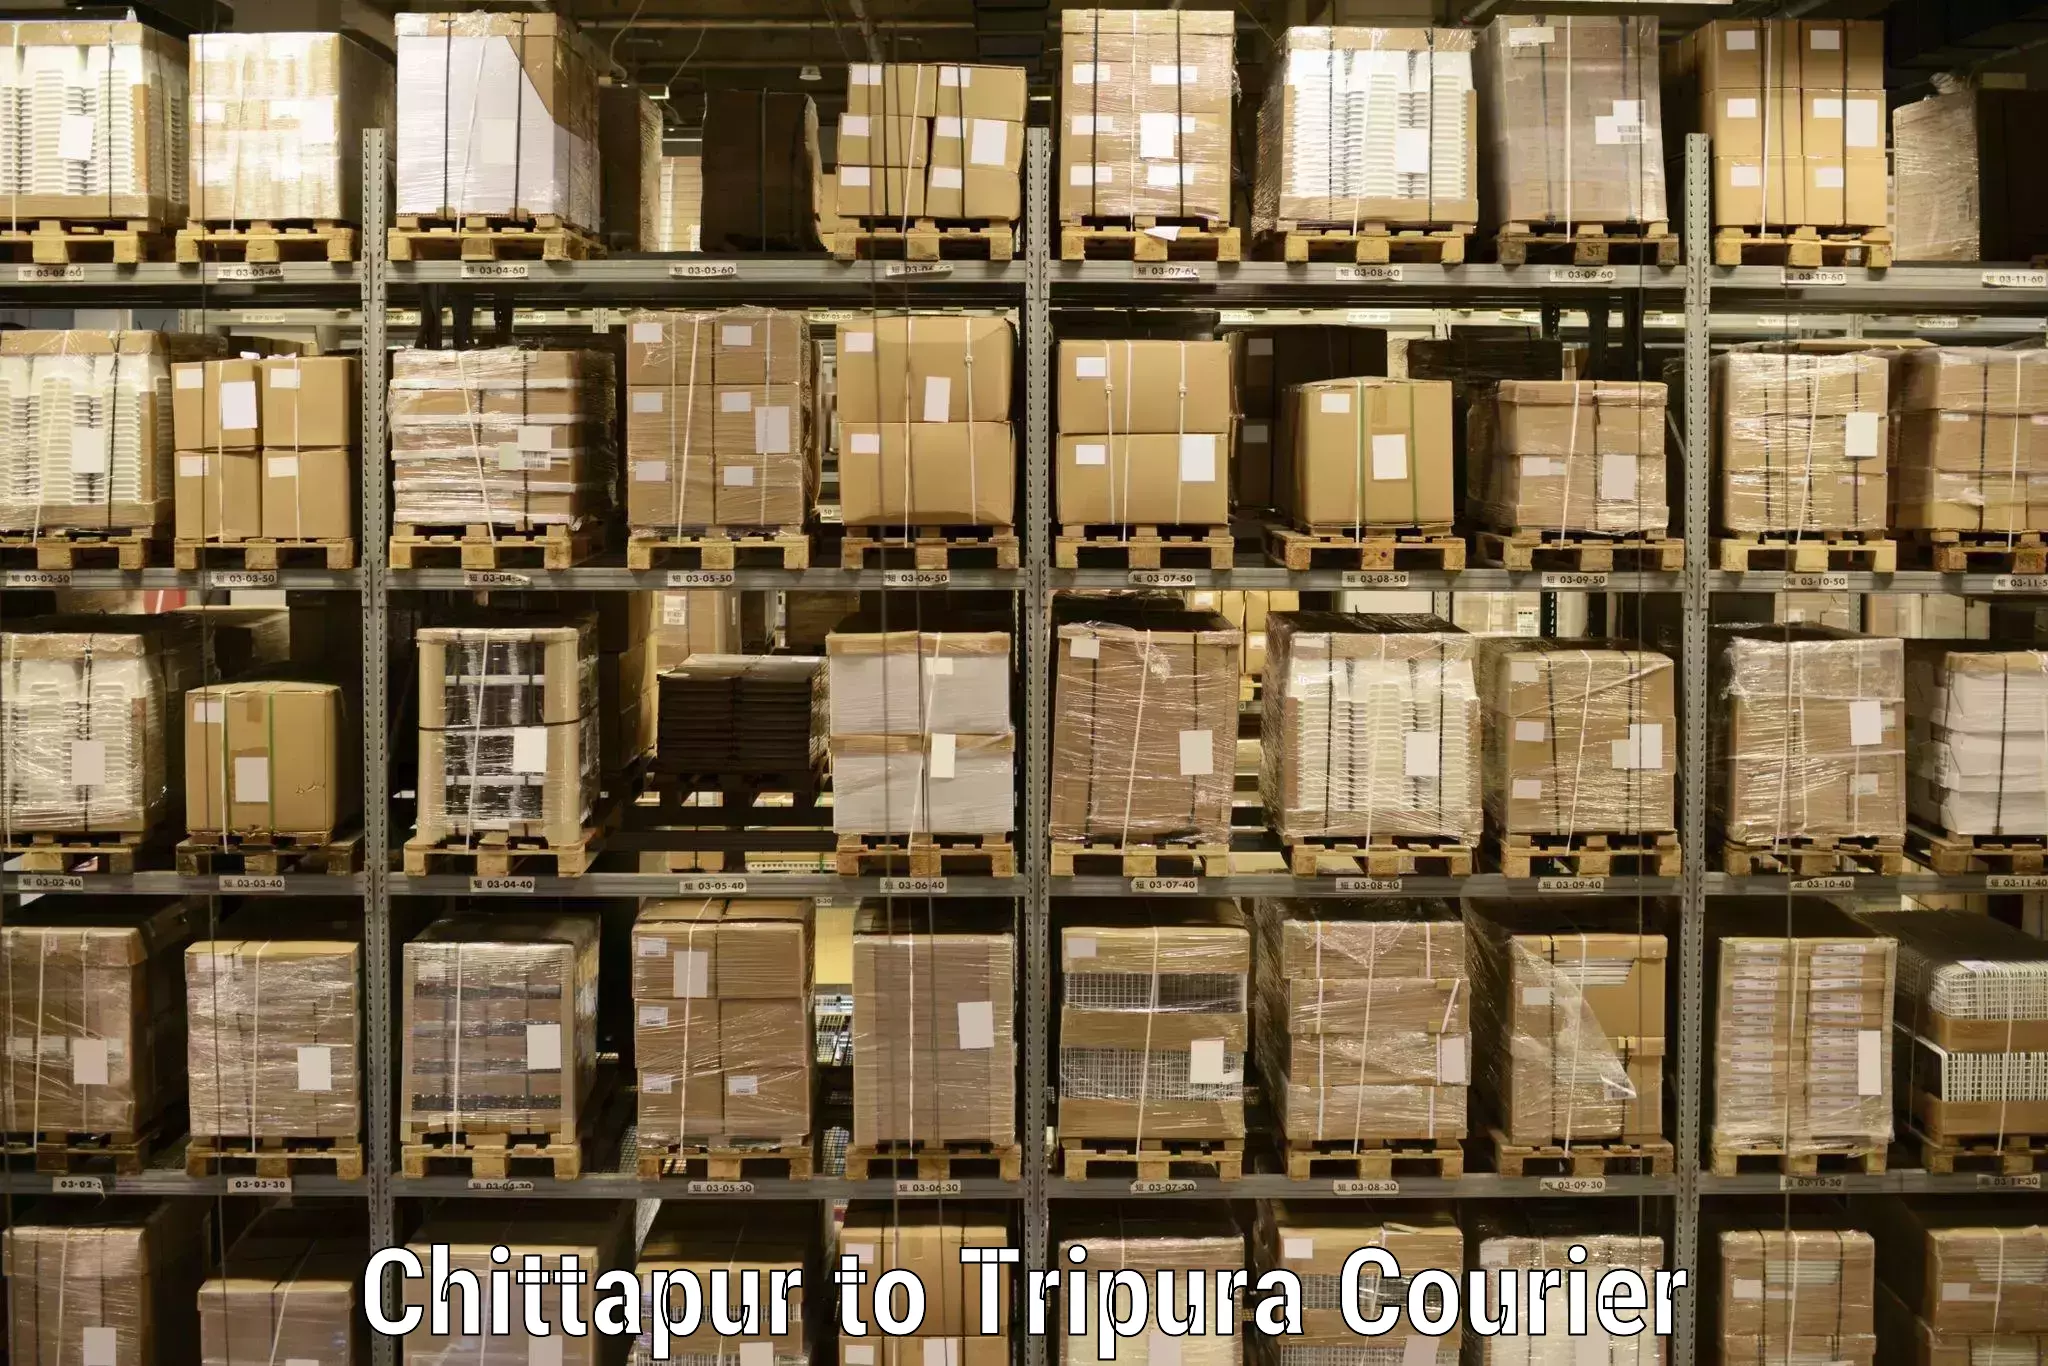 Small parcel delivery in Chittapur to Udaipur Tripura